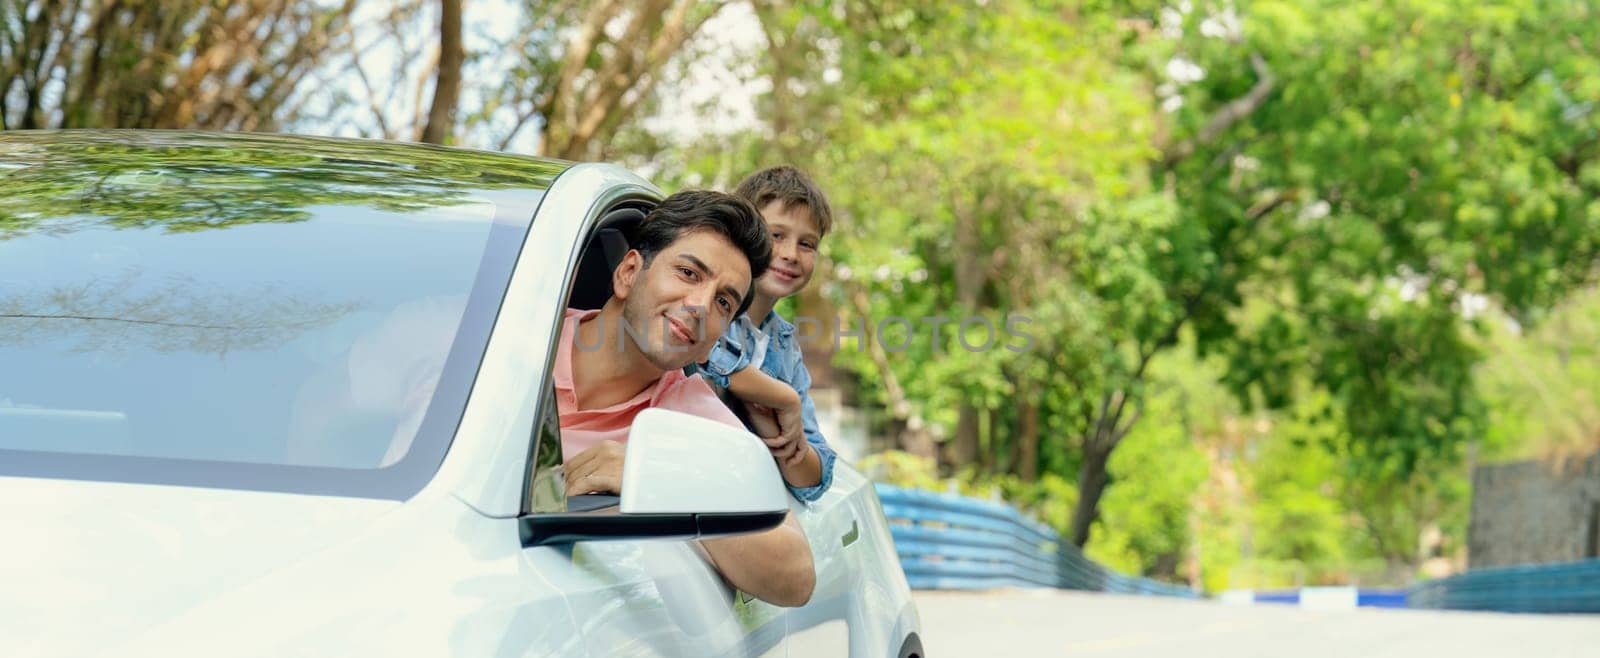 Dad and son on the road trip by the green nature countryside, family vholiday vacation concept. Young little boy enjoying family car adventure vacation with his father. Perpetual